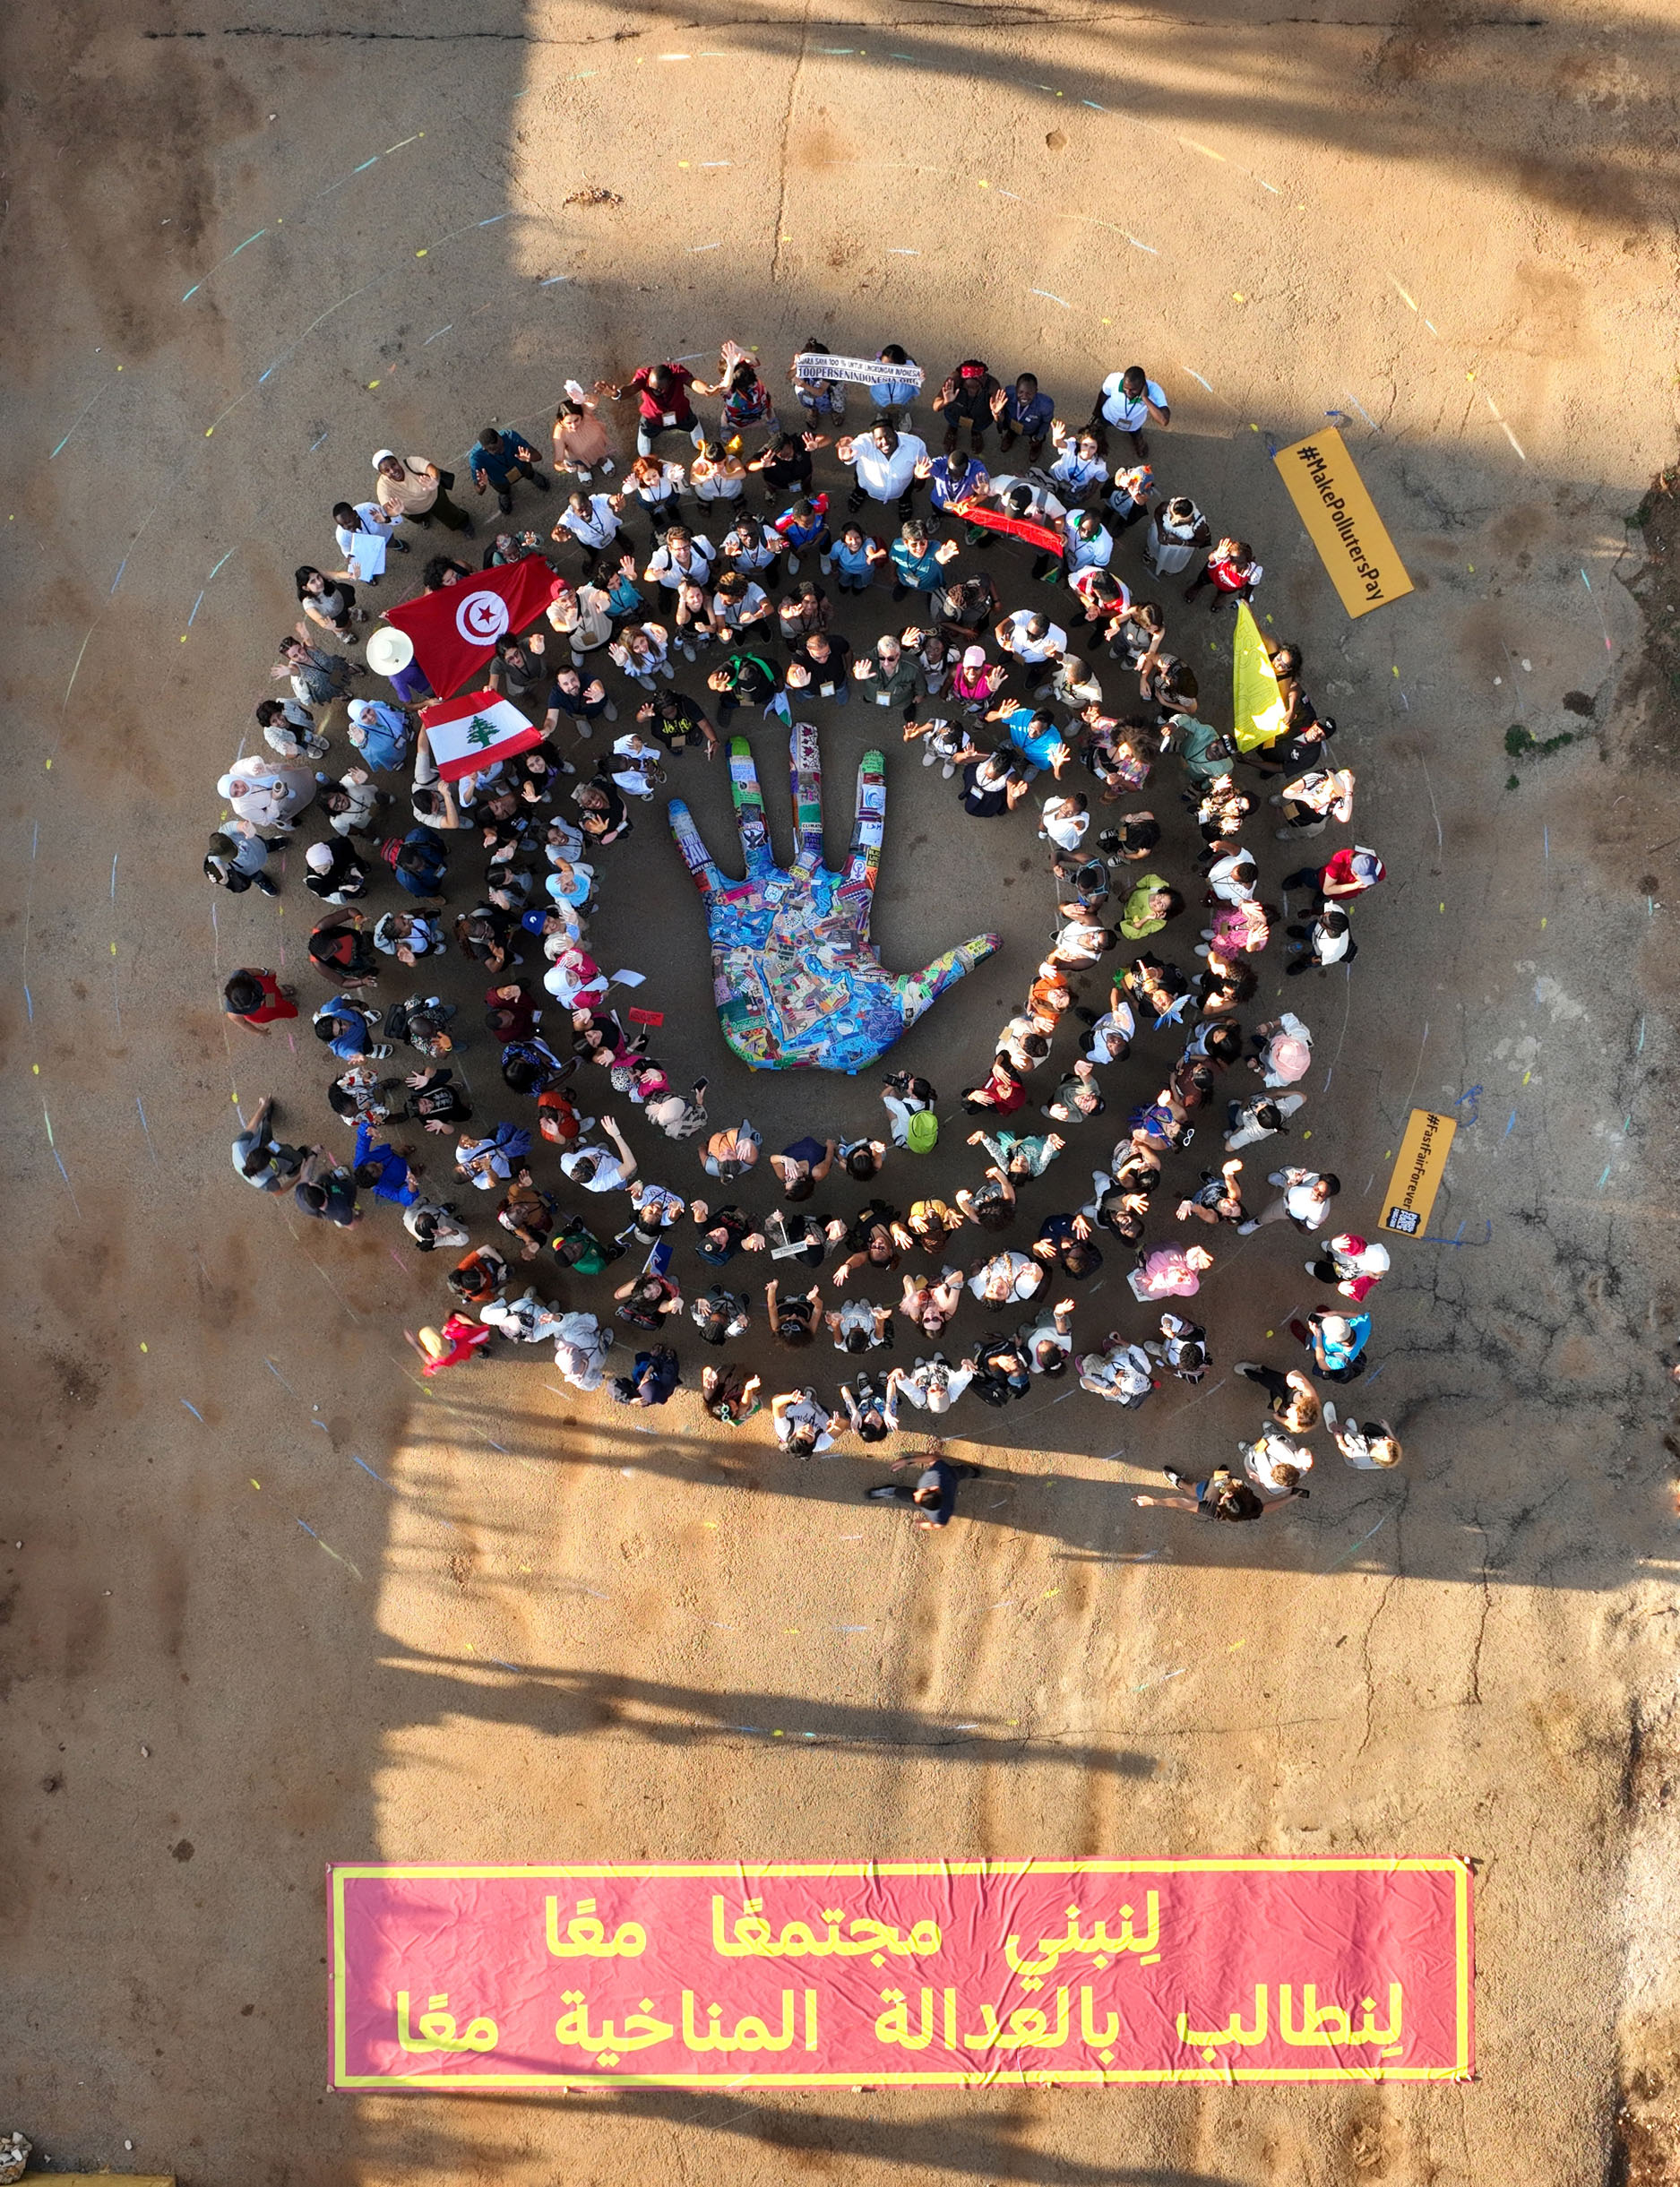 A bird's eye view of a crowd of people arranged in a circle around a blue hand. Underneath is a red banner with an Arabic text printed in yellow.